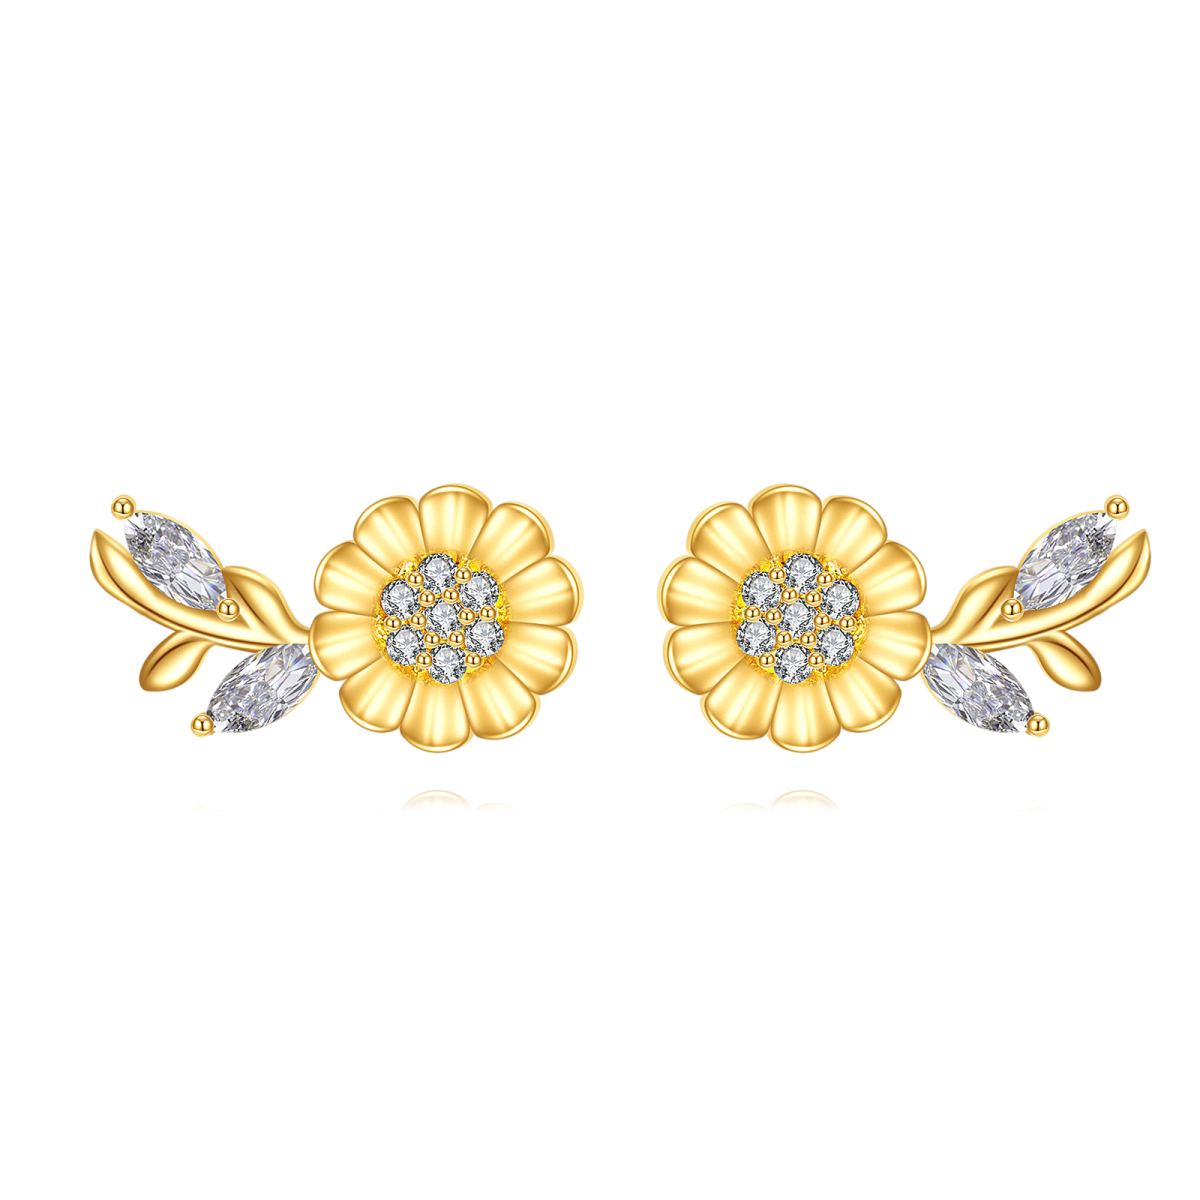 14K Gold Circular Shaped & Marquise Shaped Cubic Zirconia Sunflower Stud Earrings-1